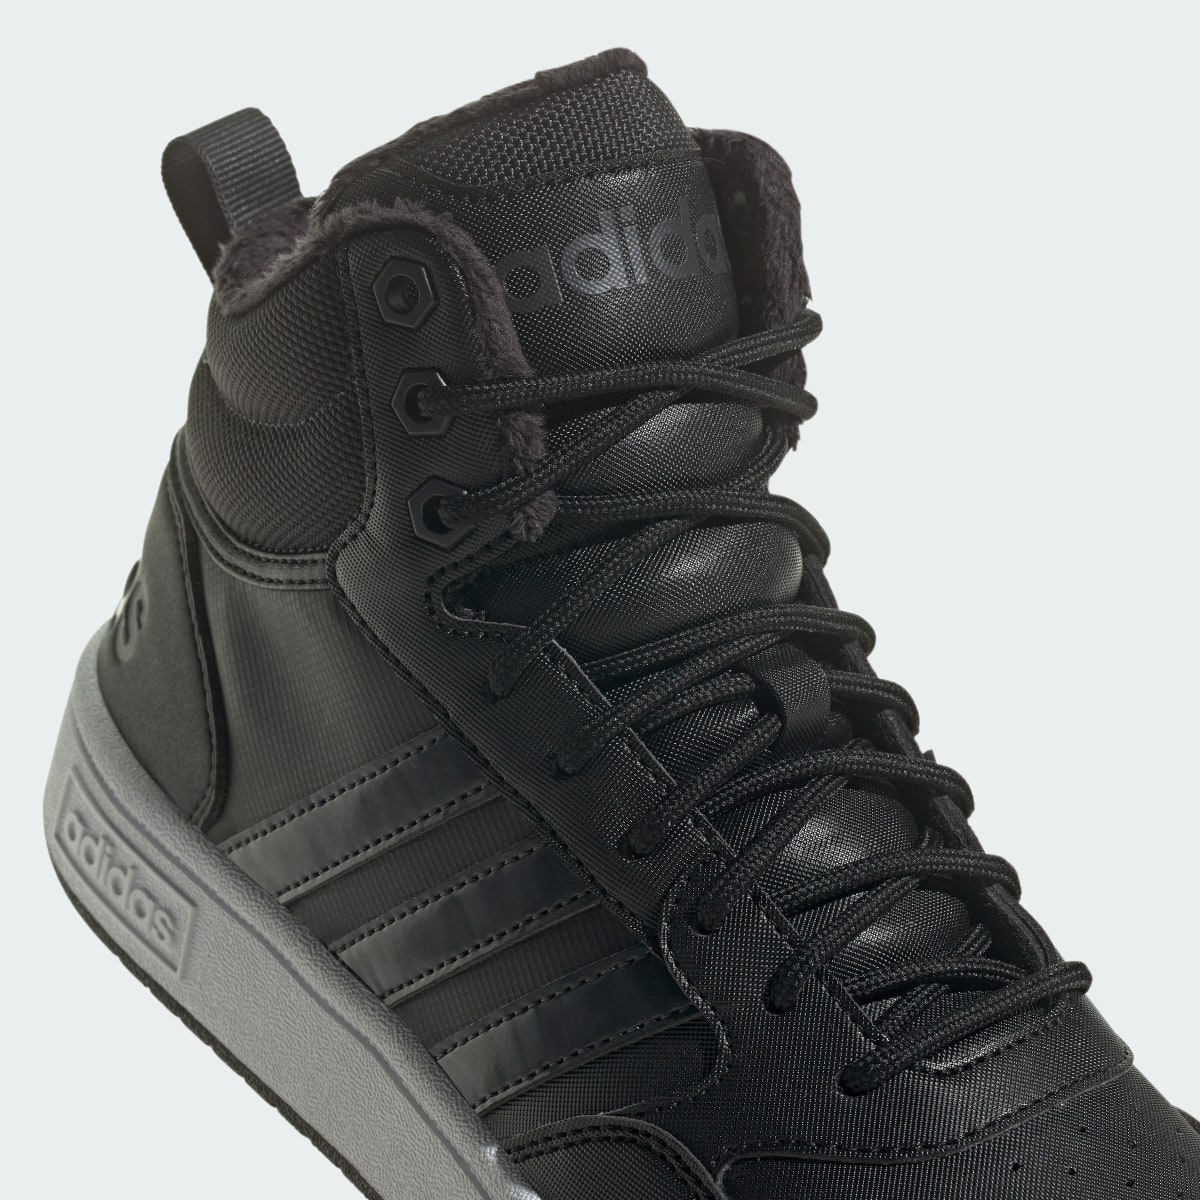 Adidas Hoops 3.0 Mid Lifestyle Basketball Classic Fur Lining Winterized Shoes. 9